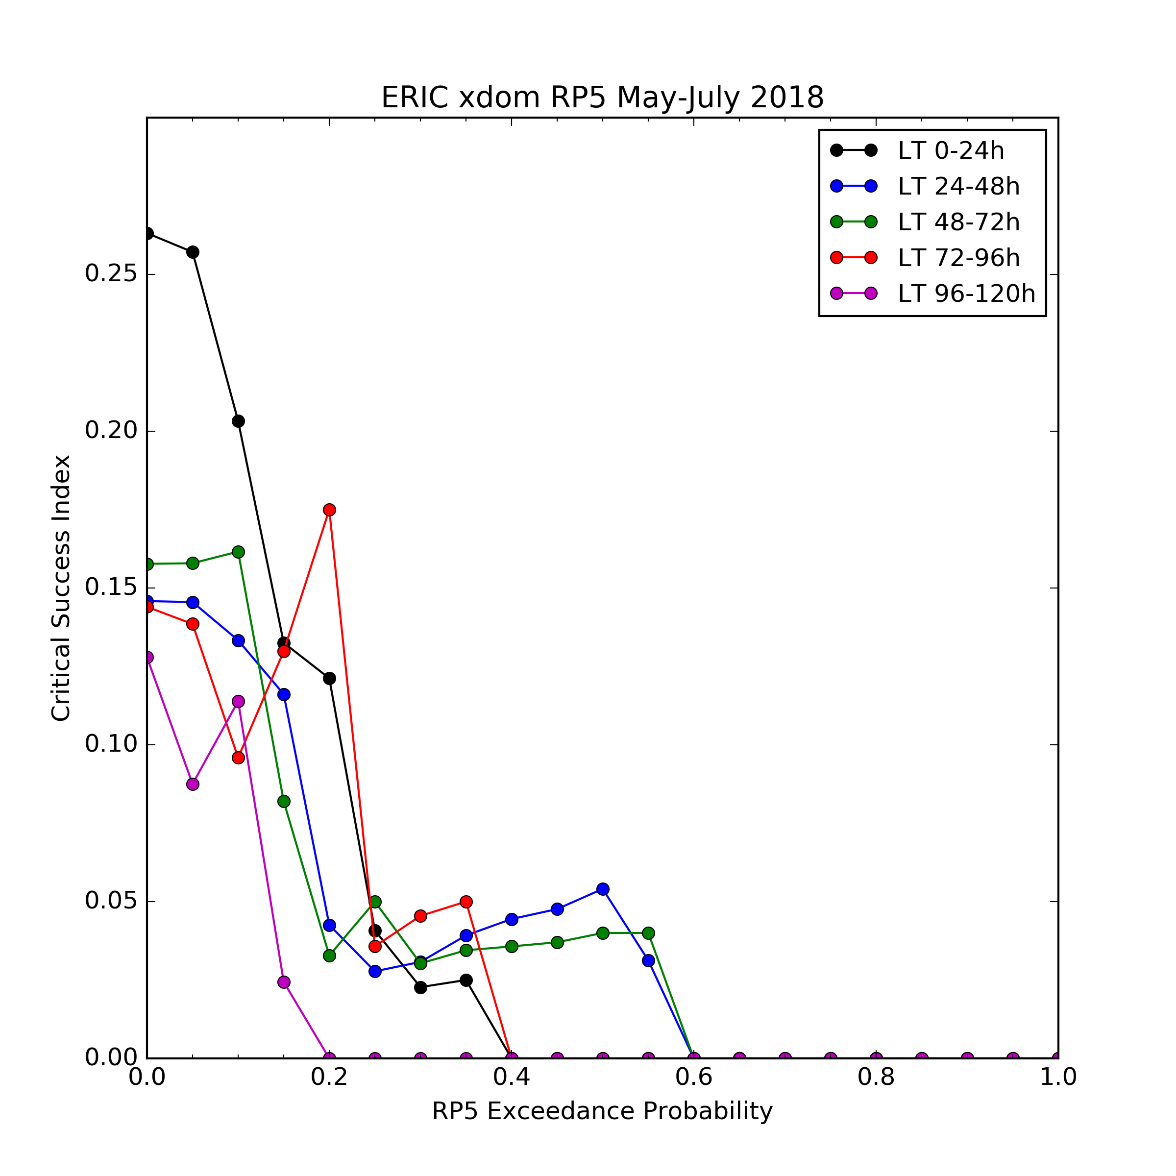 Critical Success Index (CSI) verification results for the new ERIC version with different exceedance probability thresholds of the 5-year return period level at different lead times (1, 2, 3, 4 and 5 days).